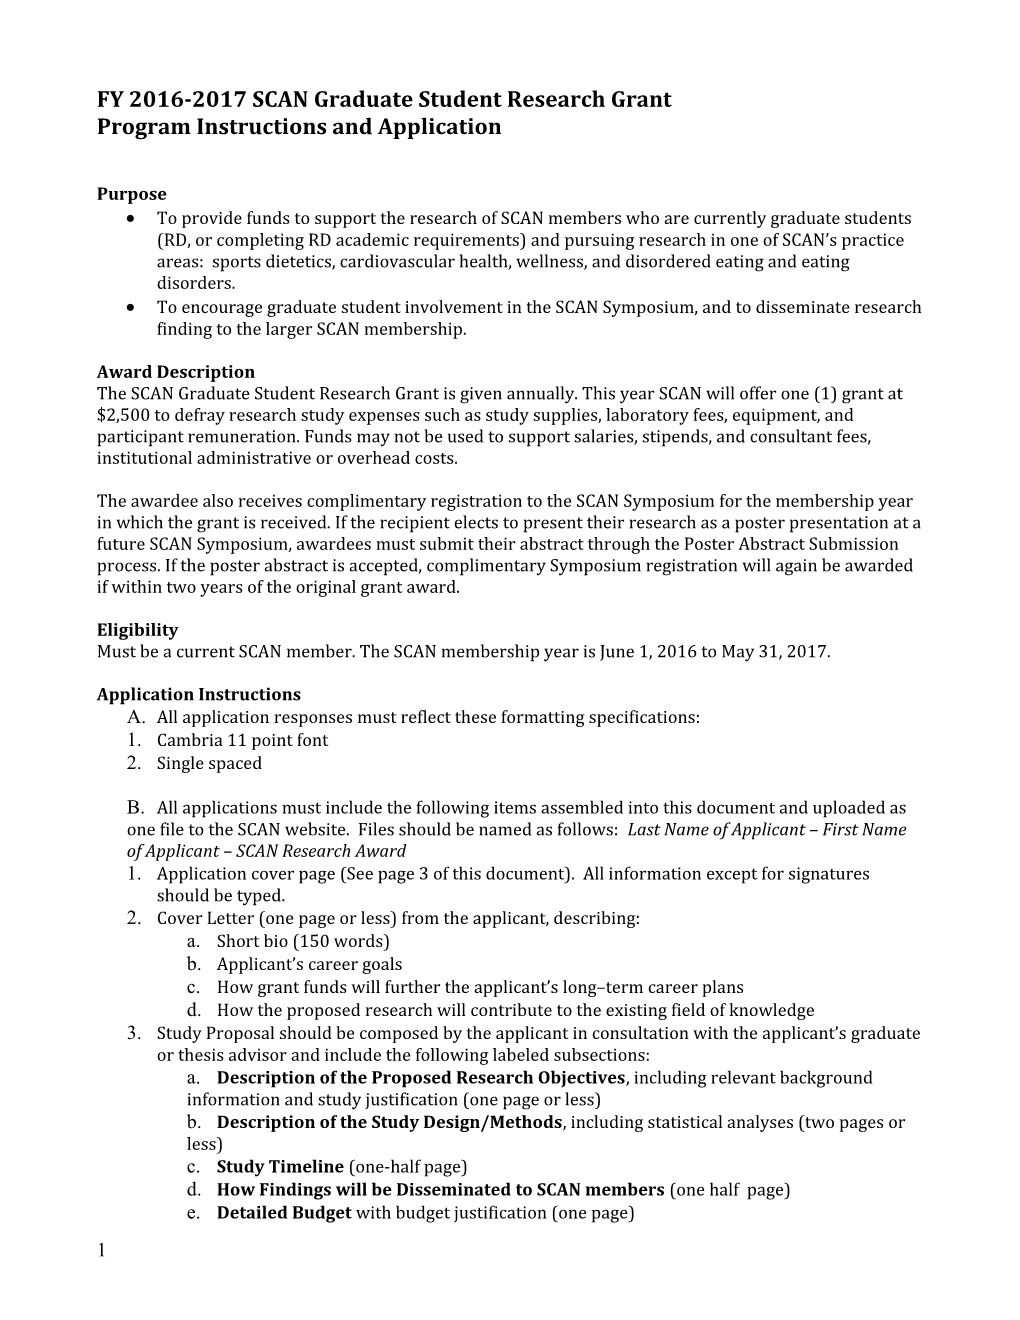 FY 2016-2017SCAN Graduate Student Research Grant Programinstructions and Application